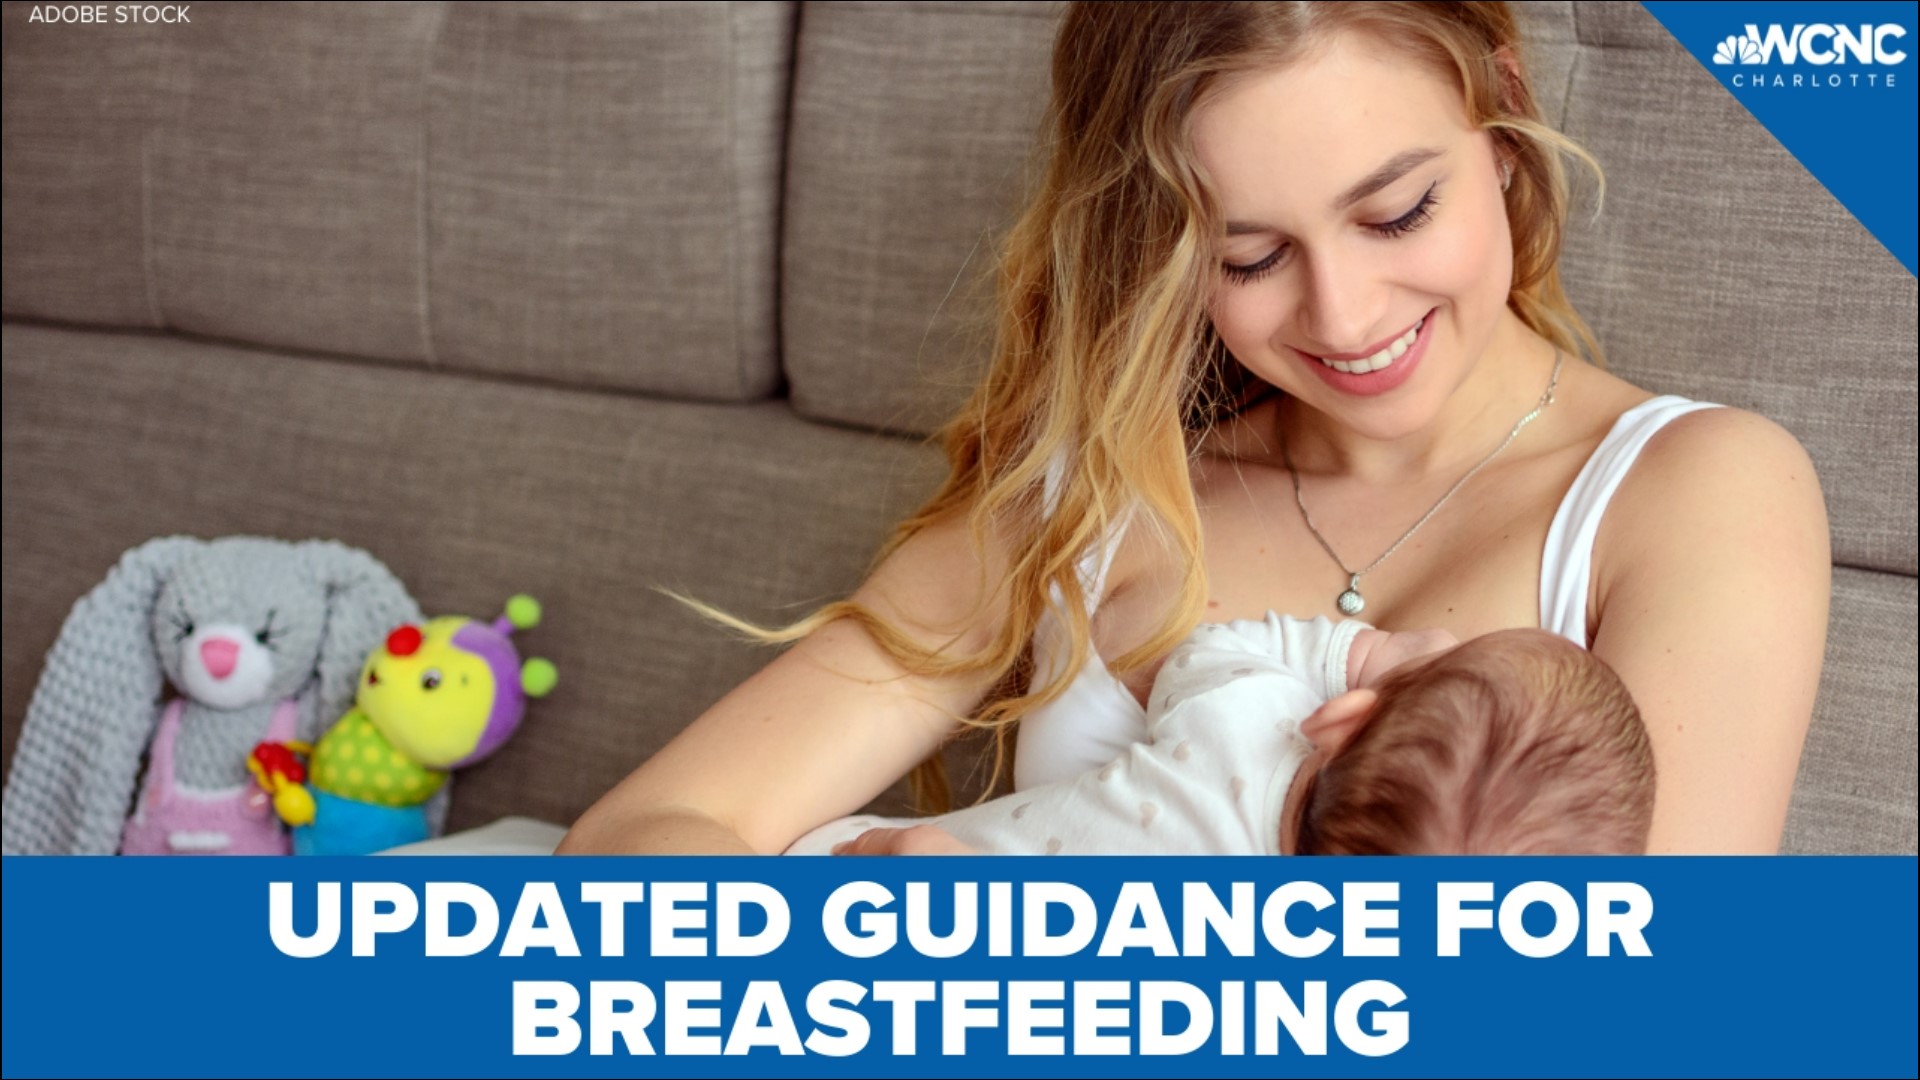 The basics of breastfeeding are getting an update from the American Academy of Pediatrics